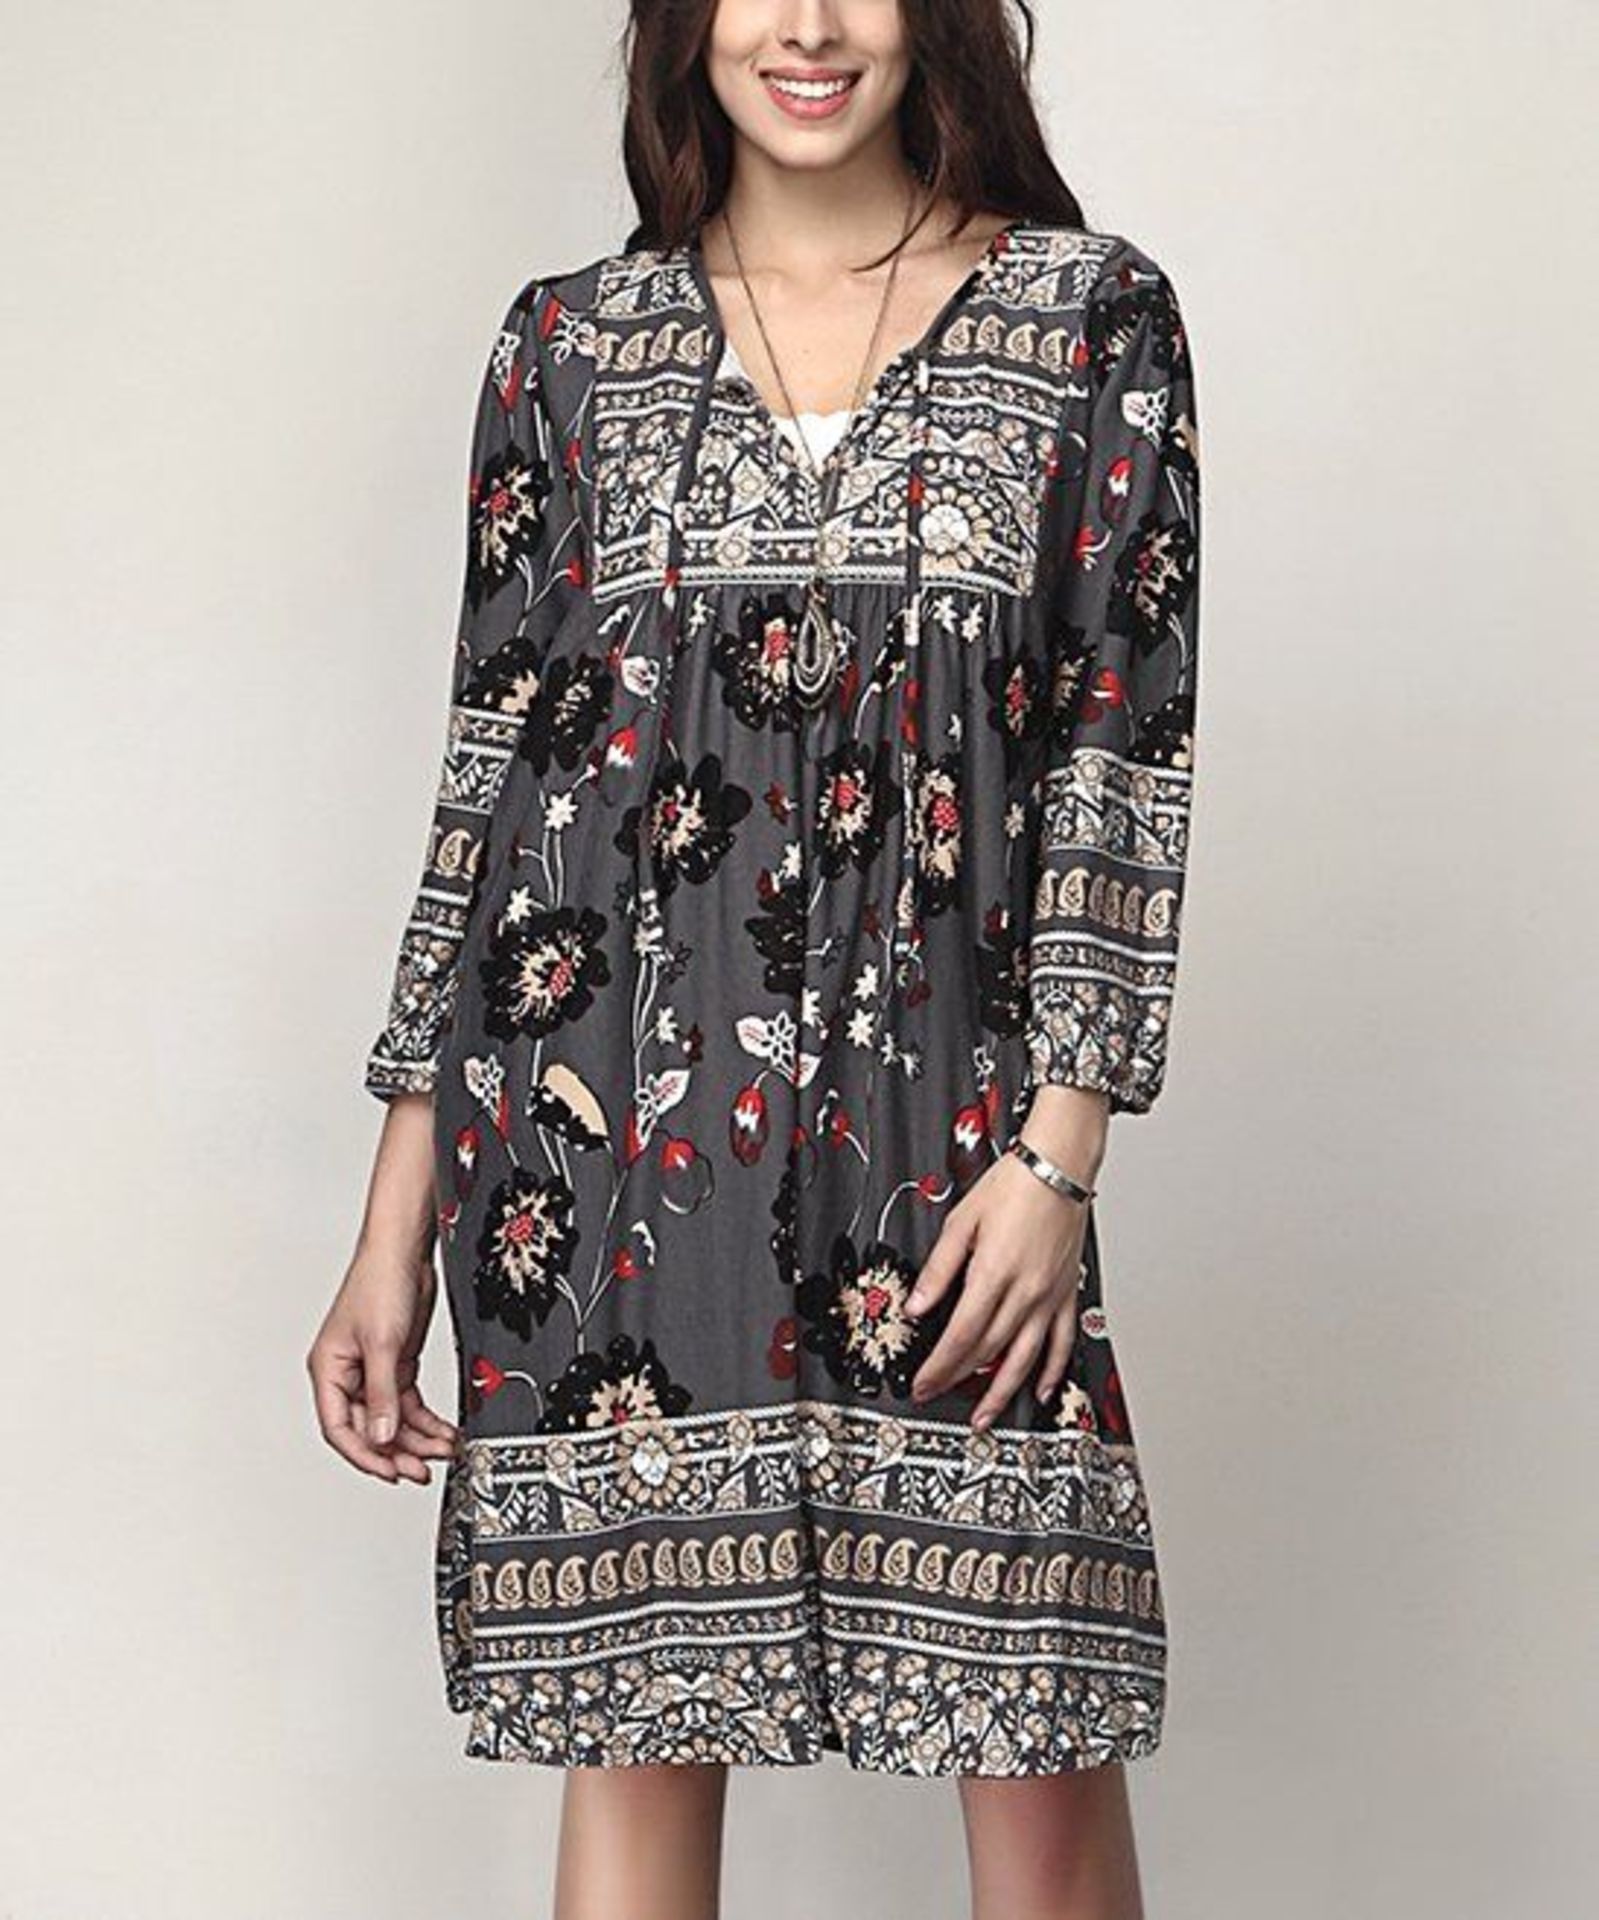 Reborn Collection Gray Floral Tie-Front Tunic Dress, UK Size 26-28 US 22-24 (New with tags) [Ref: